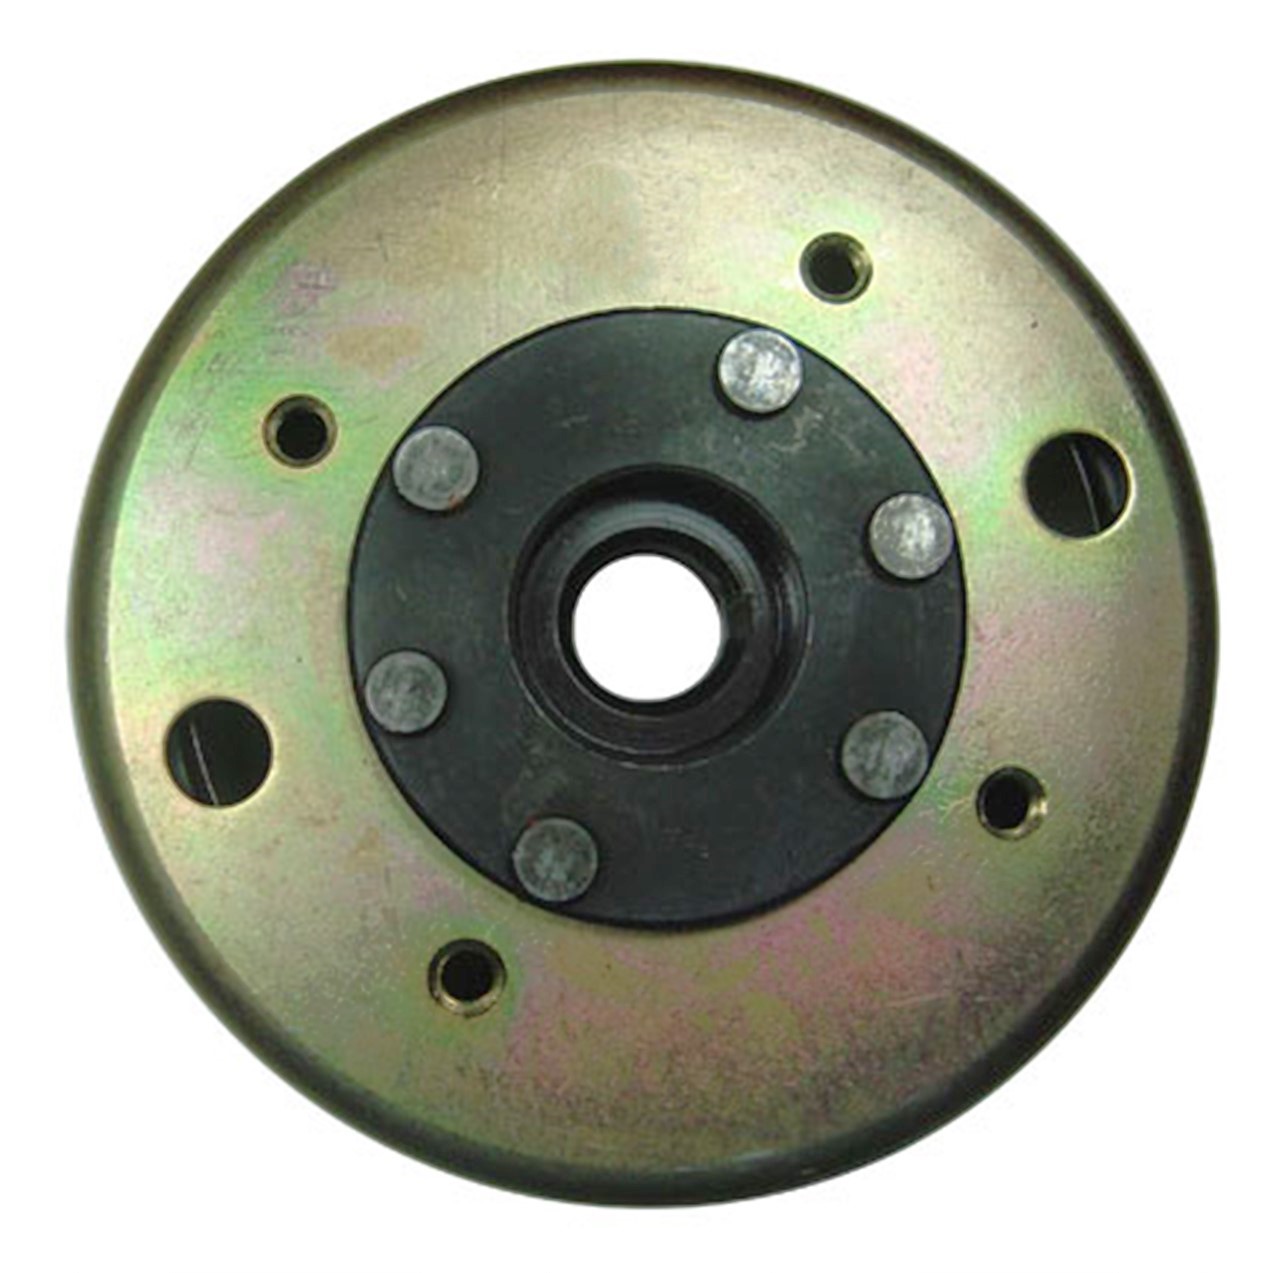 Flywheel Fits E-Ton Yukon YXL150, CXL150, Viper RXL150R, ATVs, Beamer R4-150, Matrix 150 Scooters + Others + More ID= 90mm, Hgt=40mm Shaft (closed side)=15.2, Shaft (open side)=18mm Use Puller# 634192